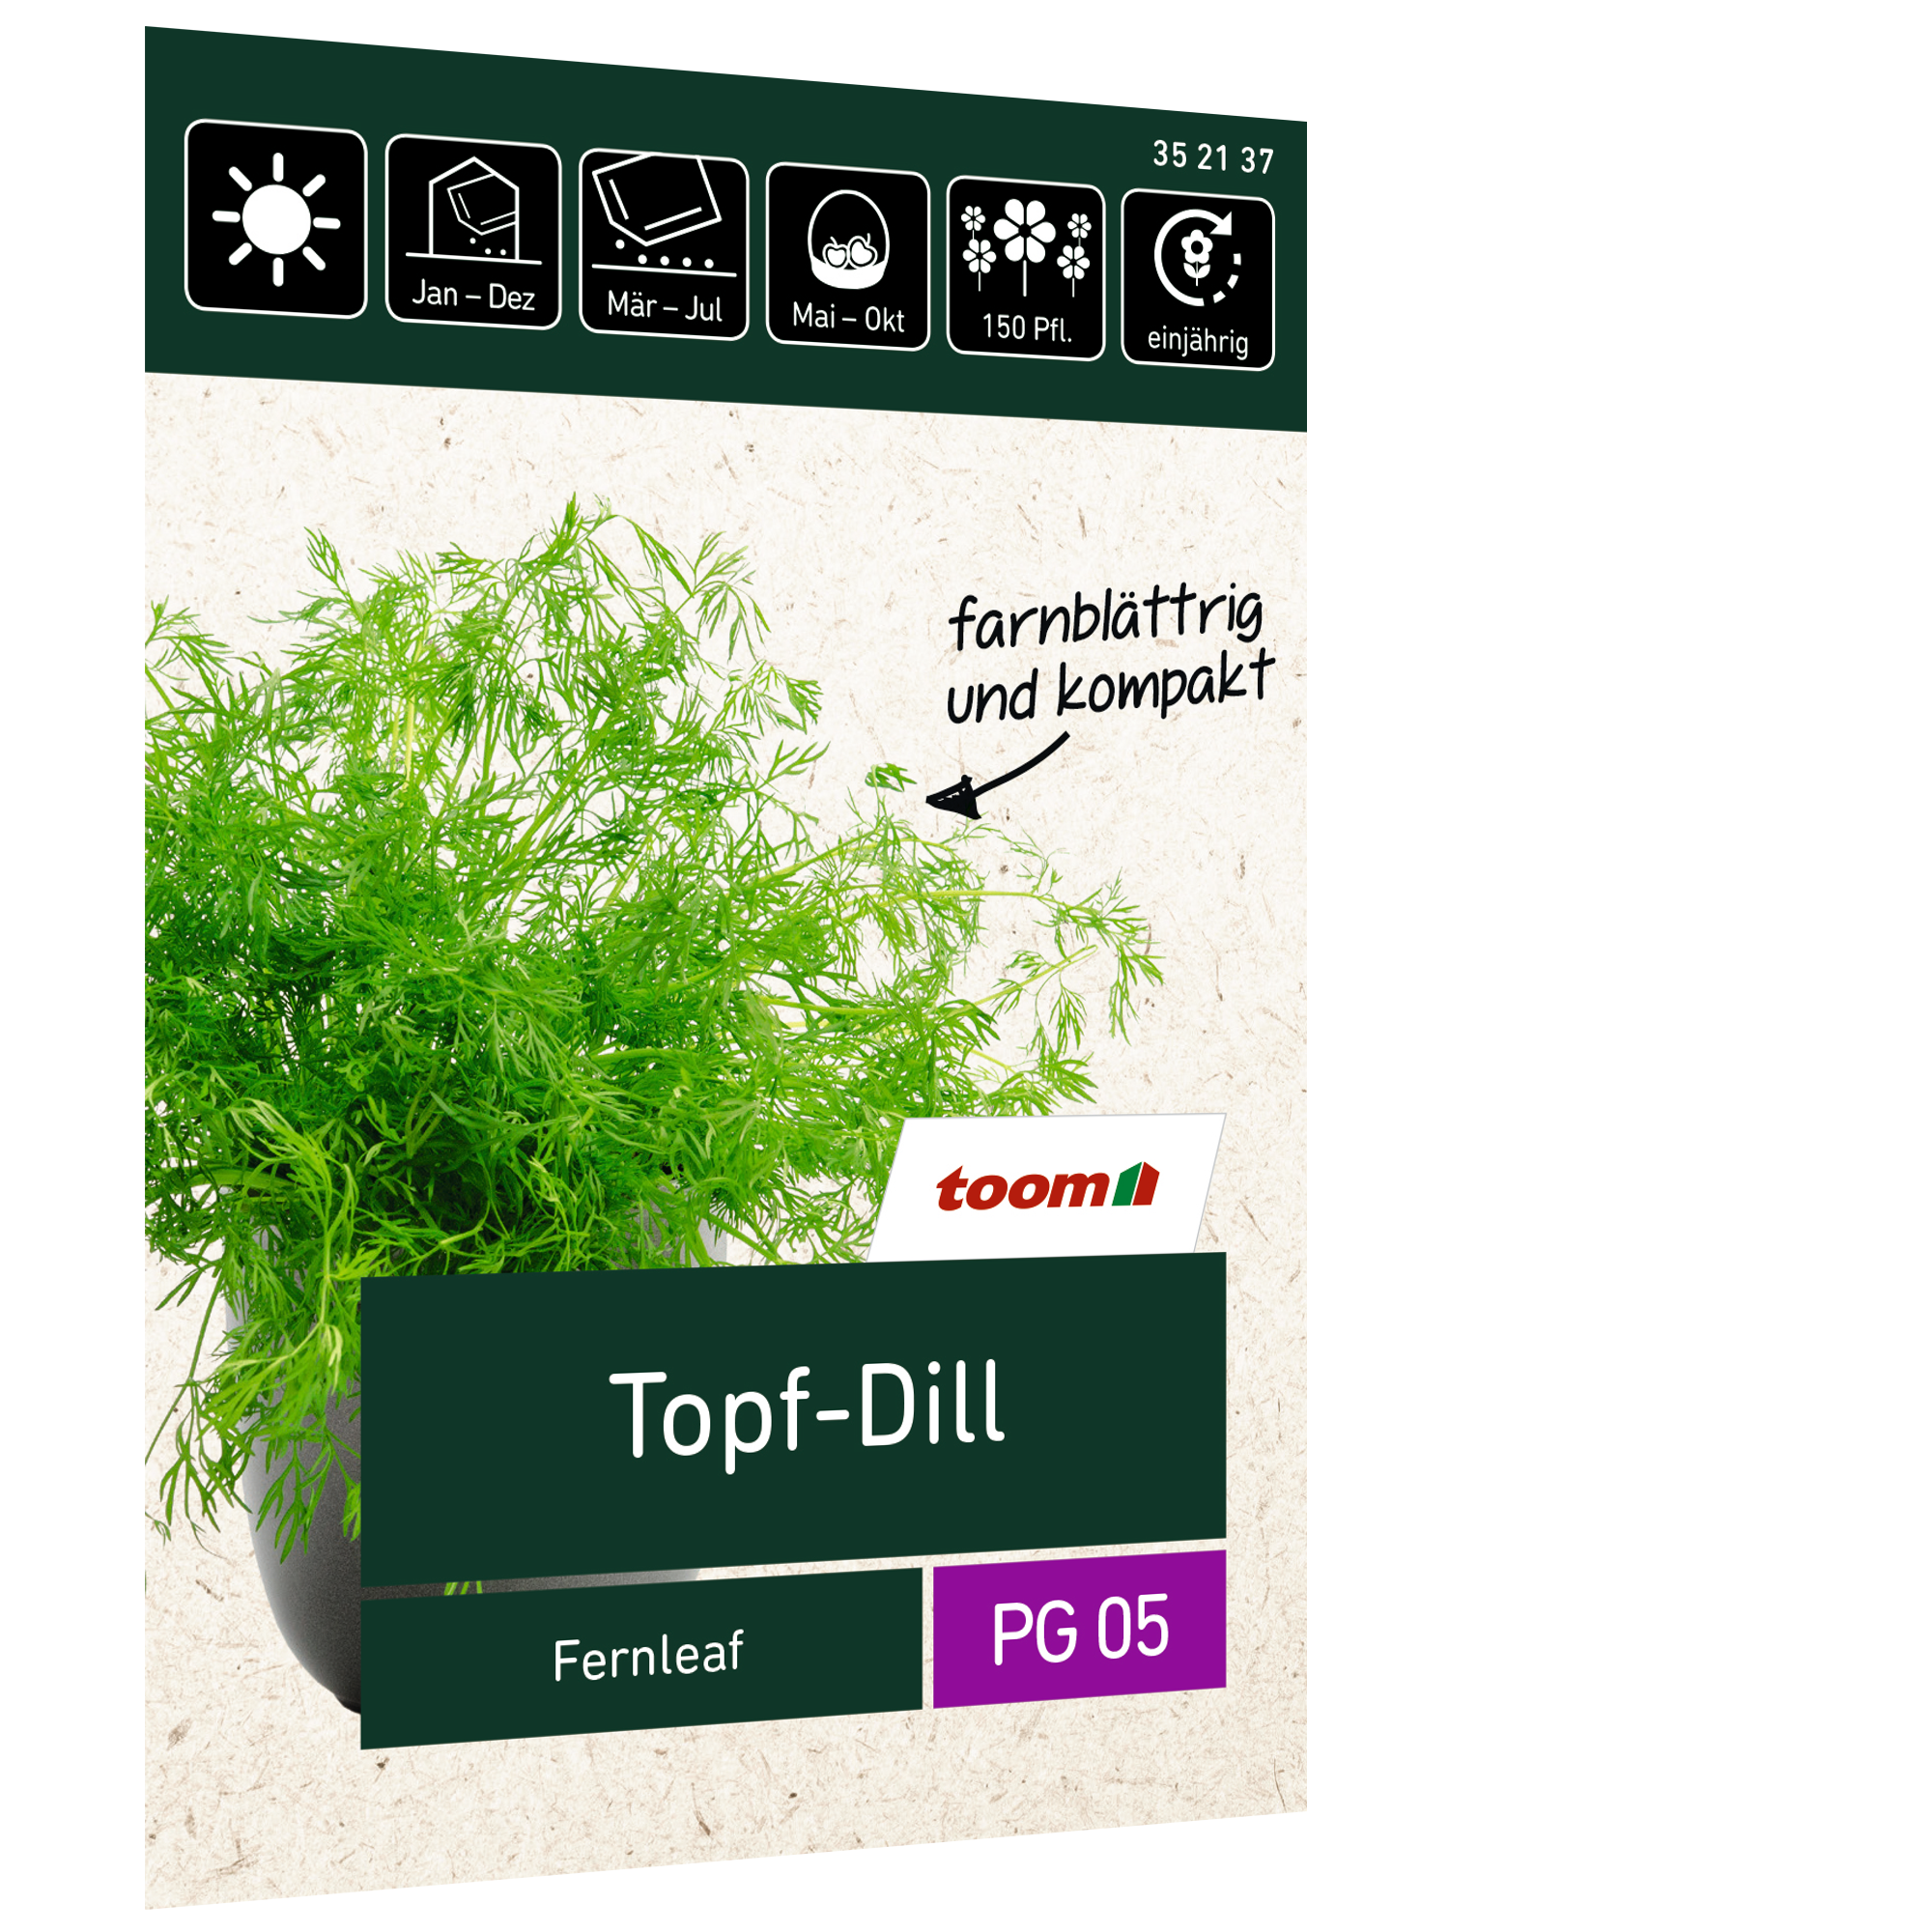 Topf-Dill 'Fernleaf' + product picture